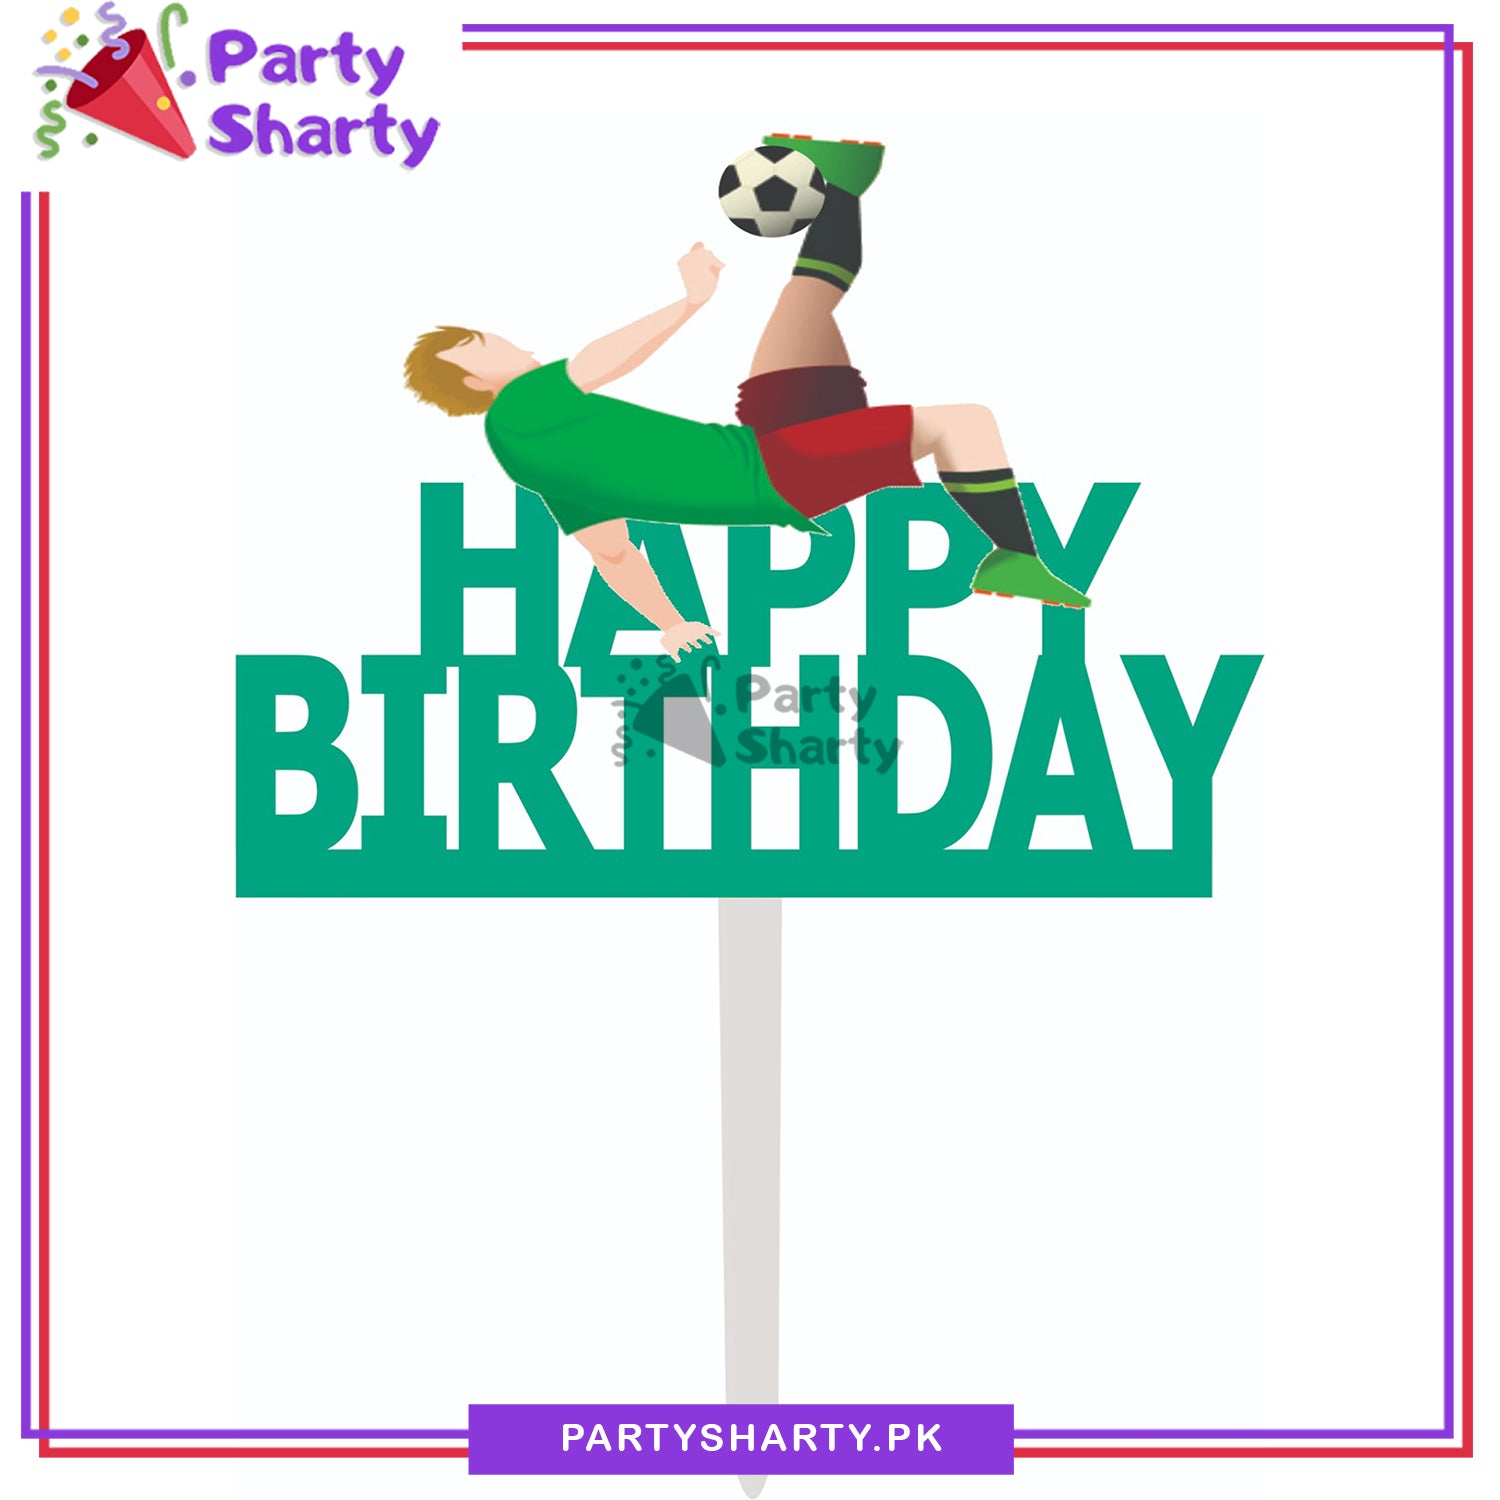 Football Theme Acrylic Birthday Cake Topper for Theme Based Party Decoration And Celebration